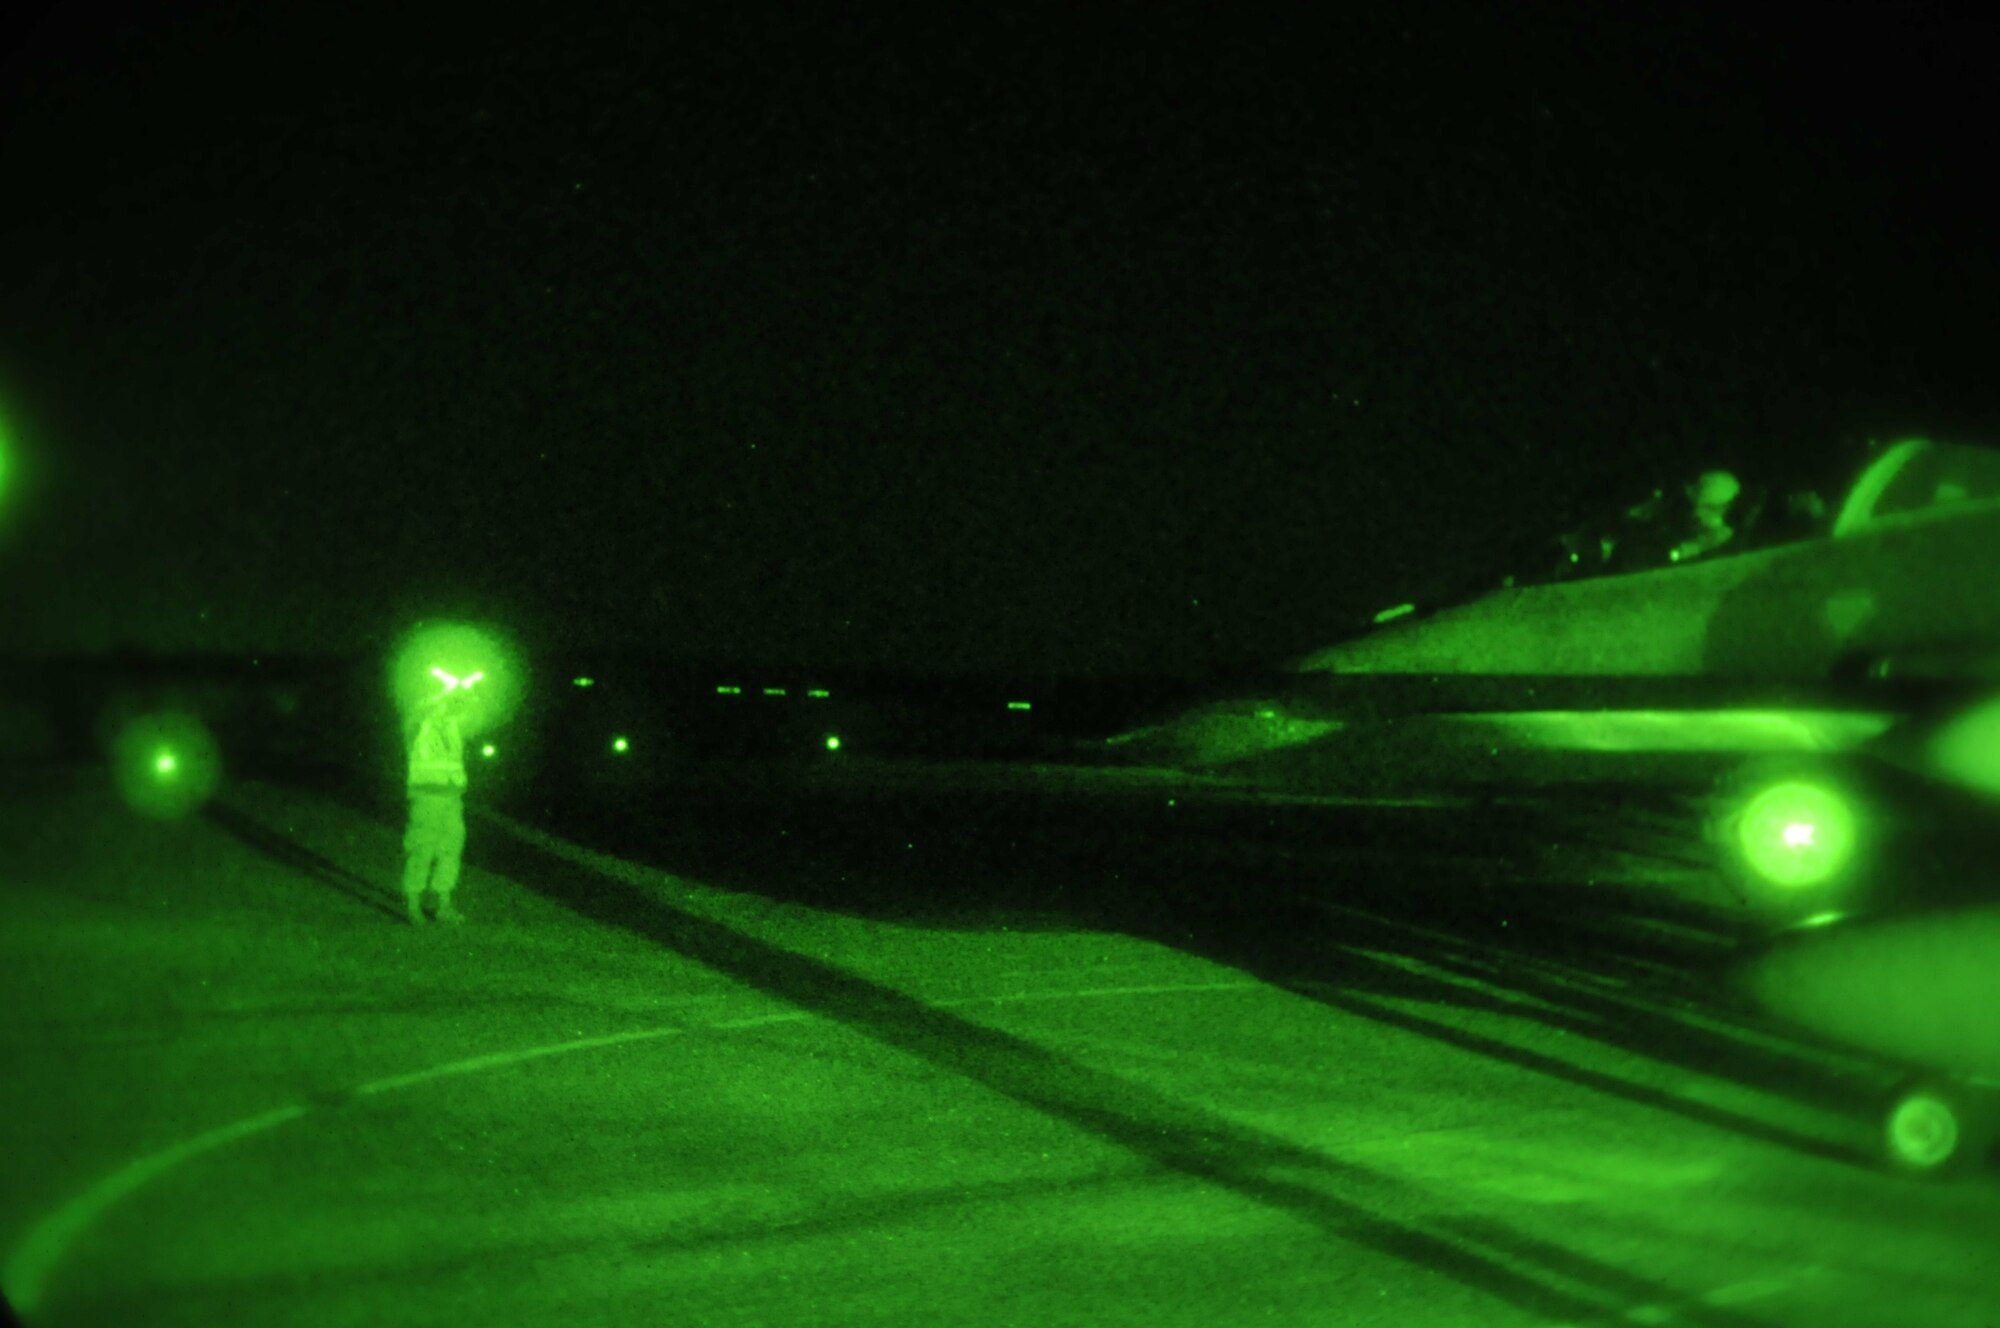 Alabama Air National Guard Staff Sgt. Brandon Blackburn marshals an F-16 Fighting Falcon to the End of Runway (EOR) during night flying operations at Dannelly Field Air National Guard Base, Ala., Feb. 26, 2014. The EOR is used for final system checks of the F-16 before the aircraft takes off. (U.S. Air Force photo by Tech. Sgt. Matthew Garrett)